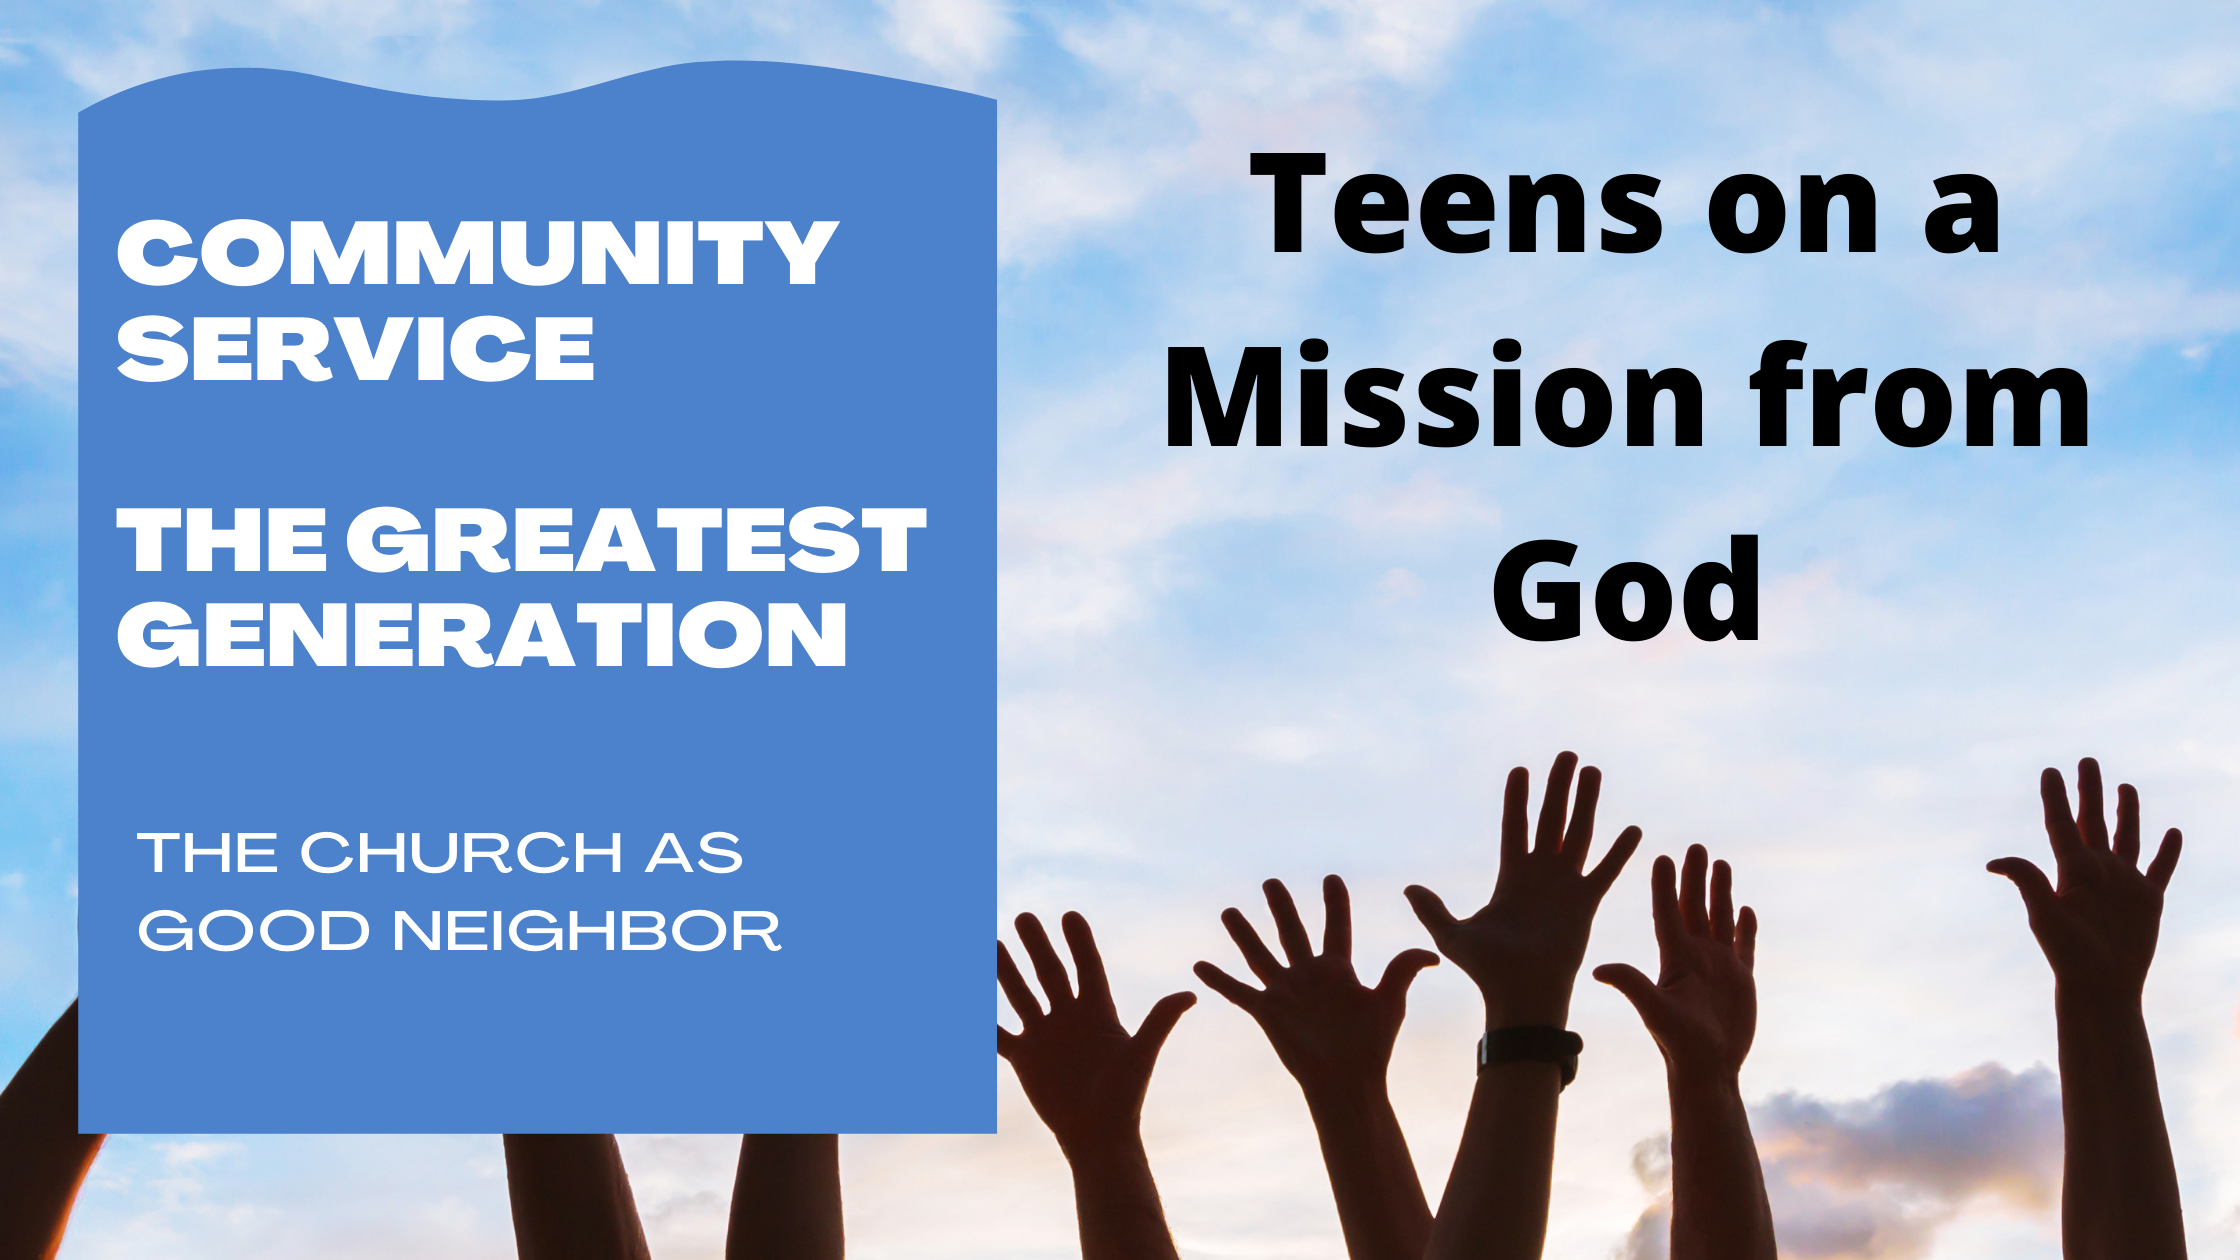 _community service Teens on a Mission from God